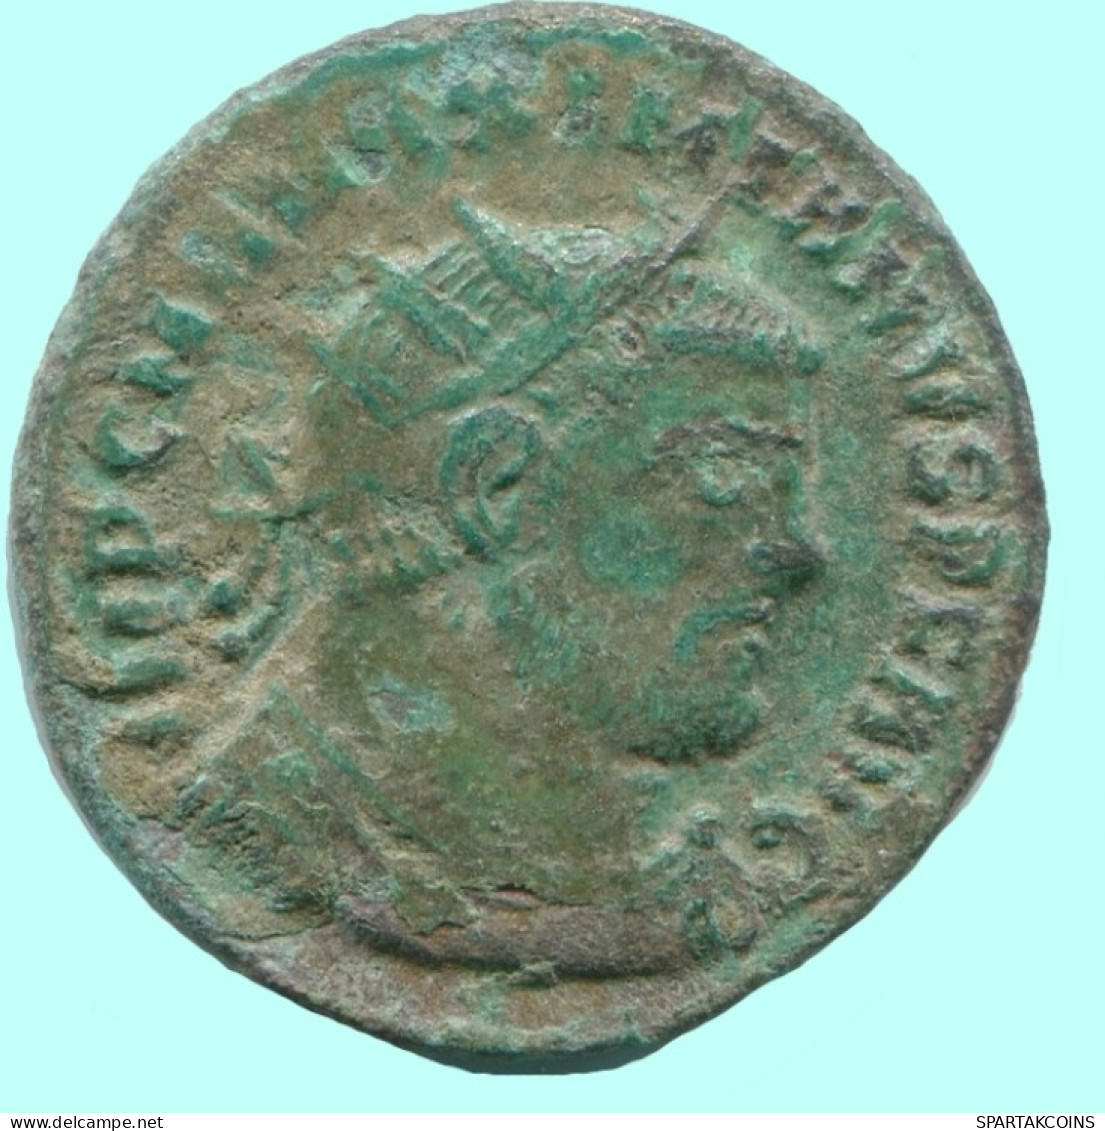 MAXIMIANUS HERACLEA Mint AD 295-296 JUPITER & VICTORY 3.0g/20mm #ANC13058.17.E.A - The Tetrarchy (284 AD To 307 AD)